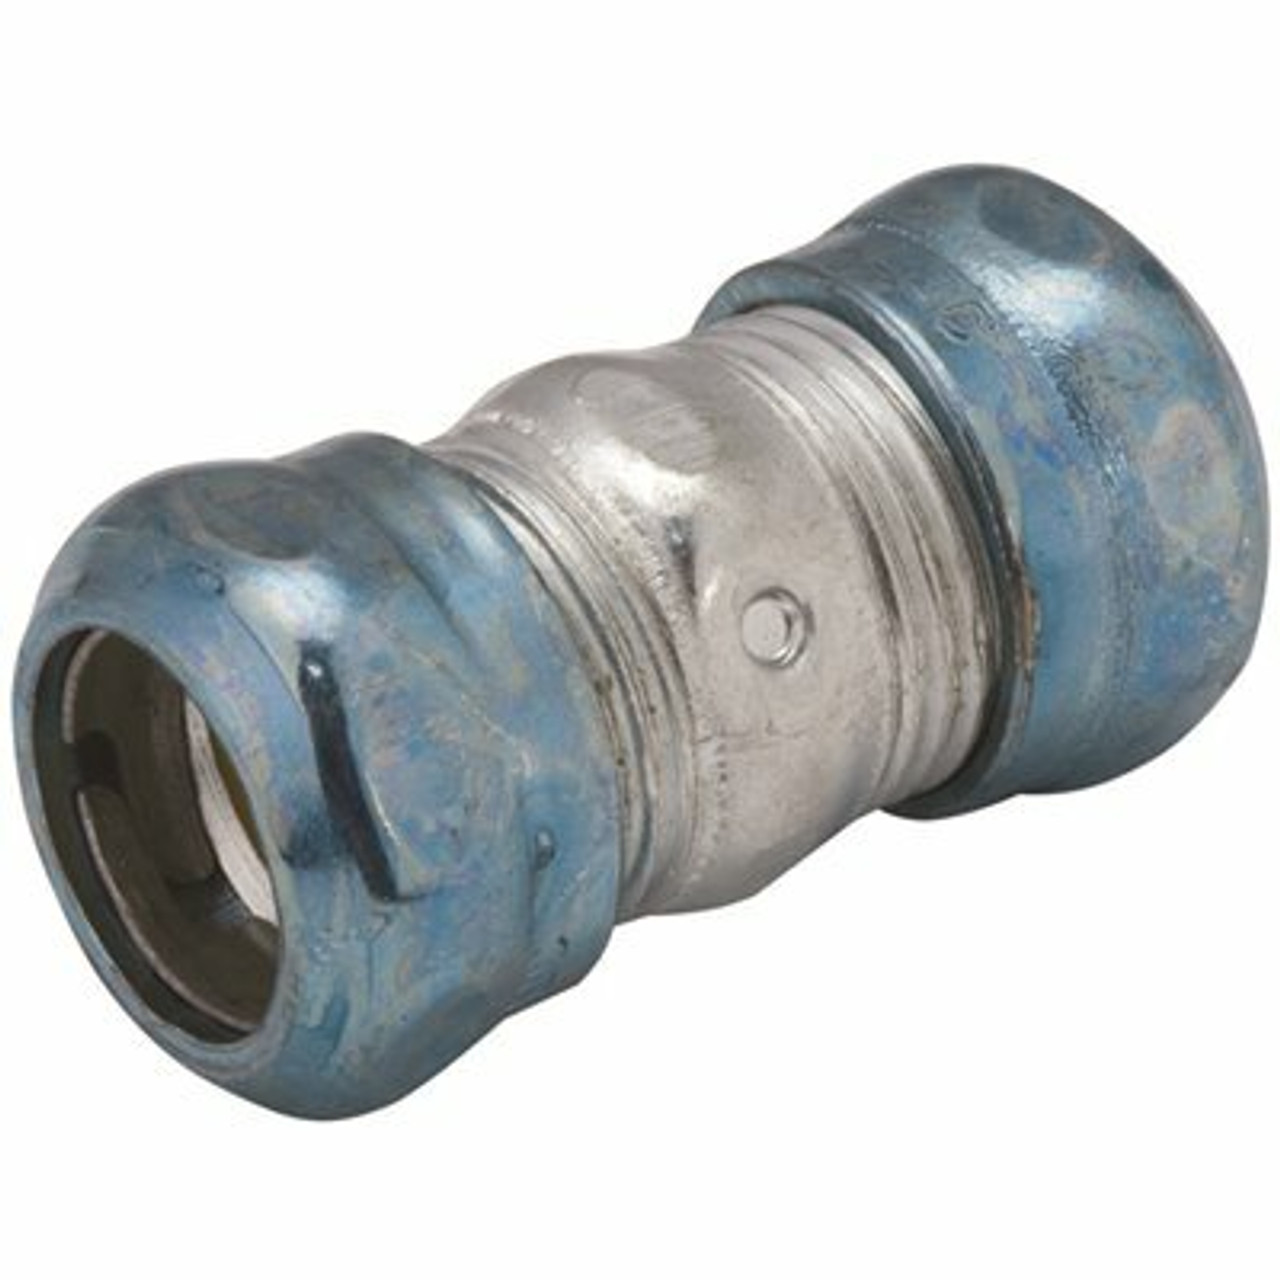 Raco 1/2 In. Emt Raintight Compression Coupling